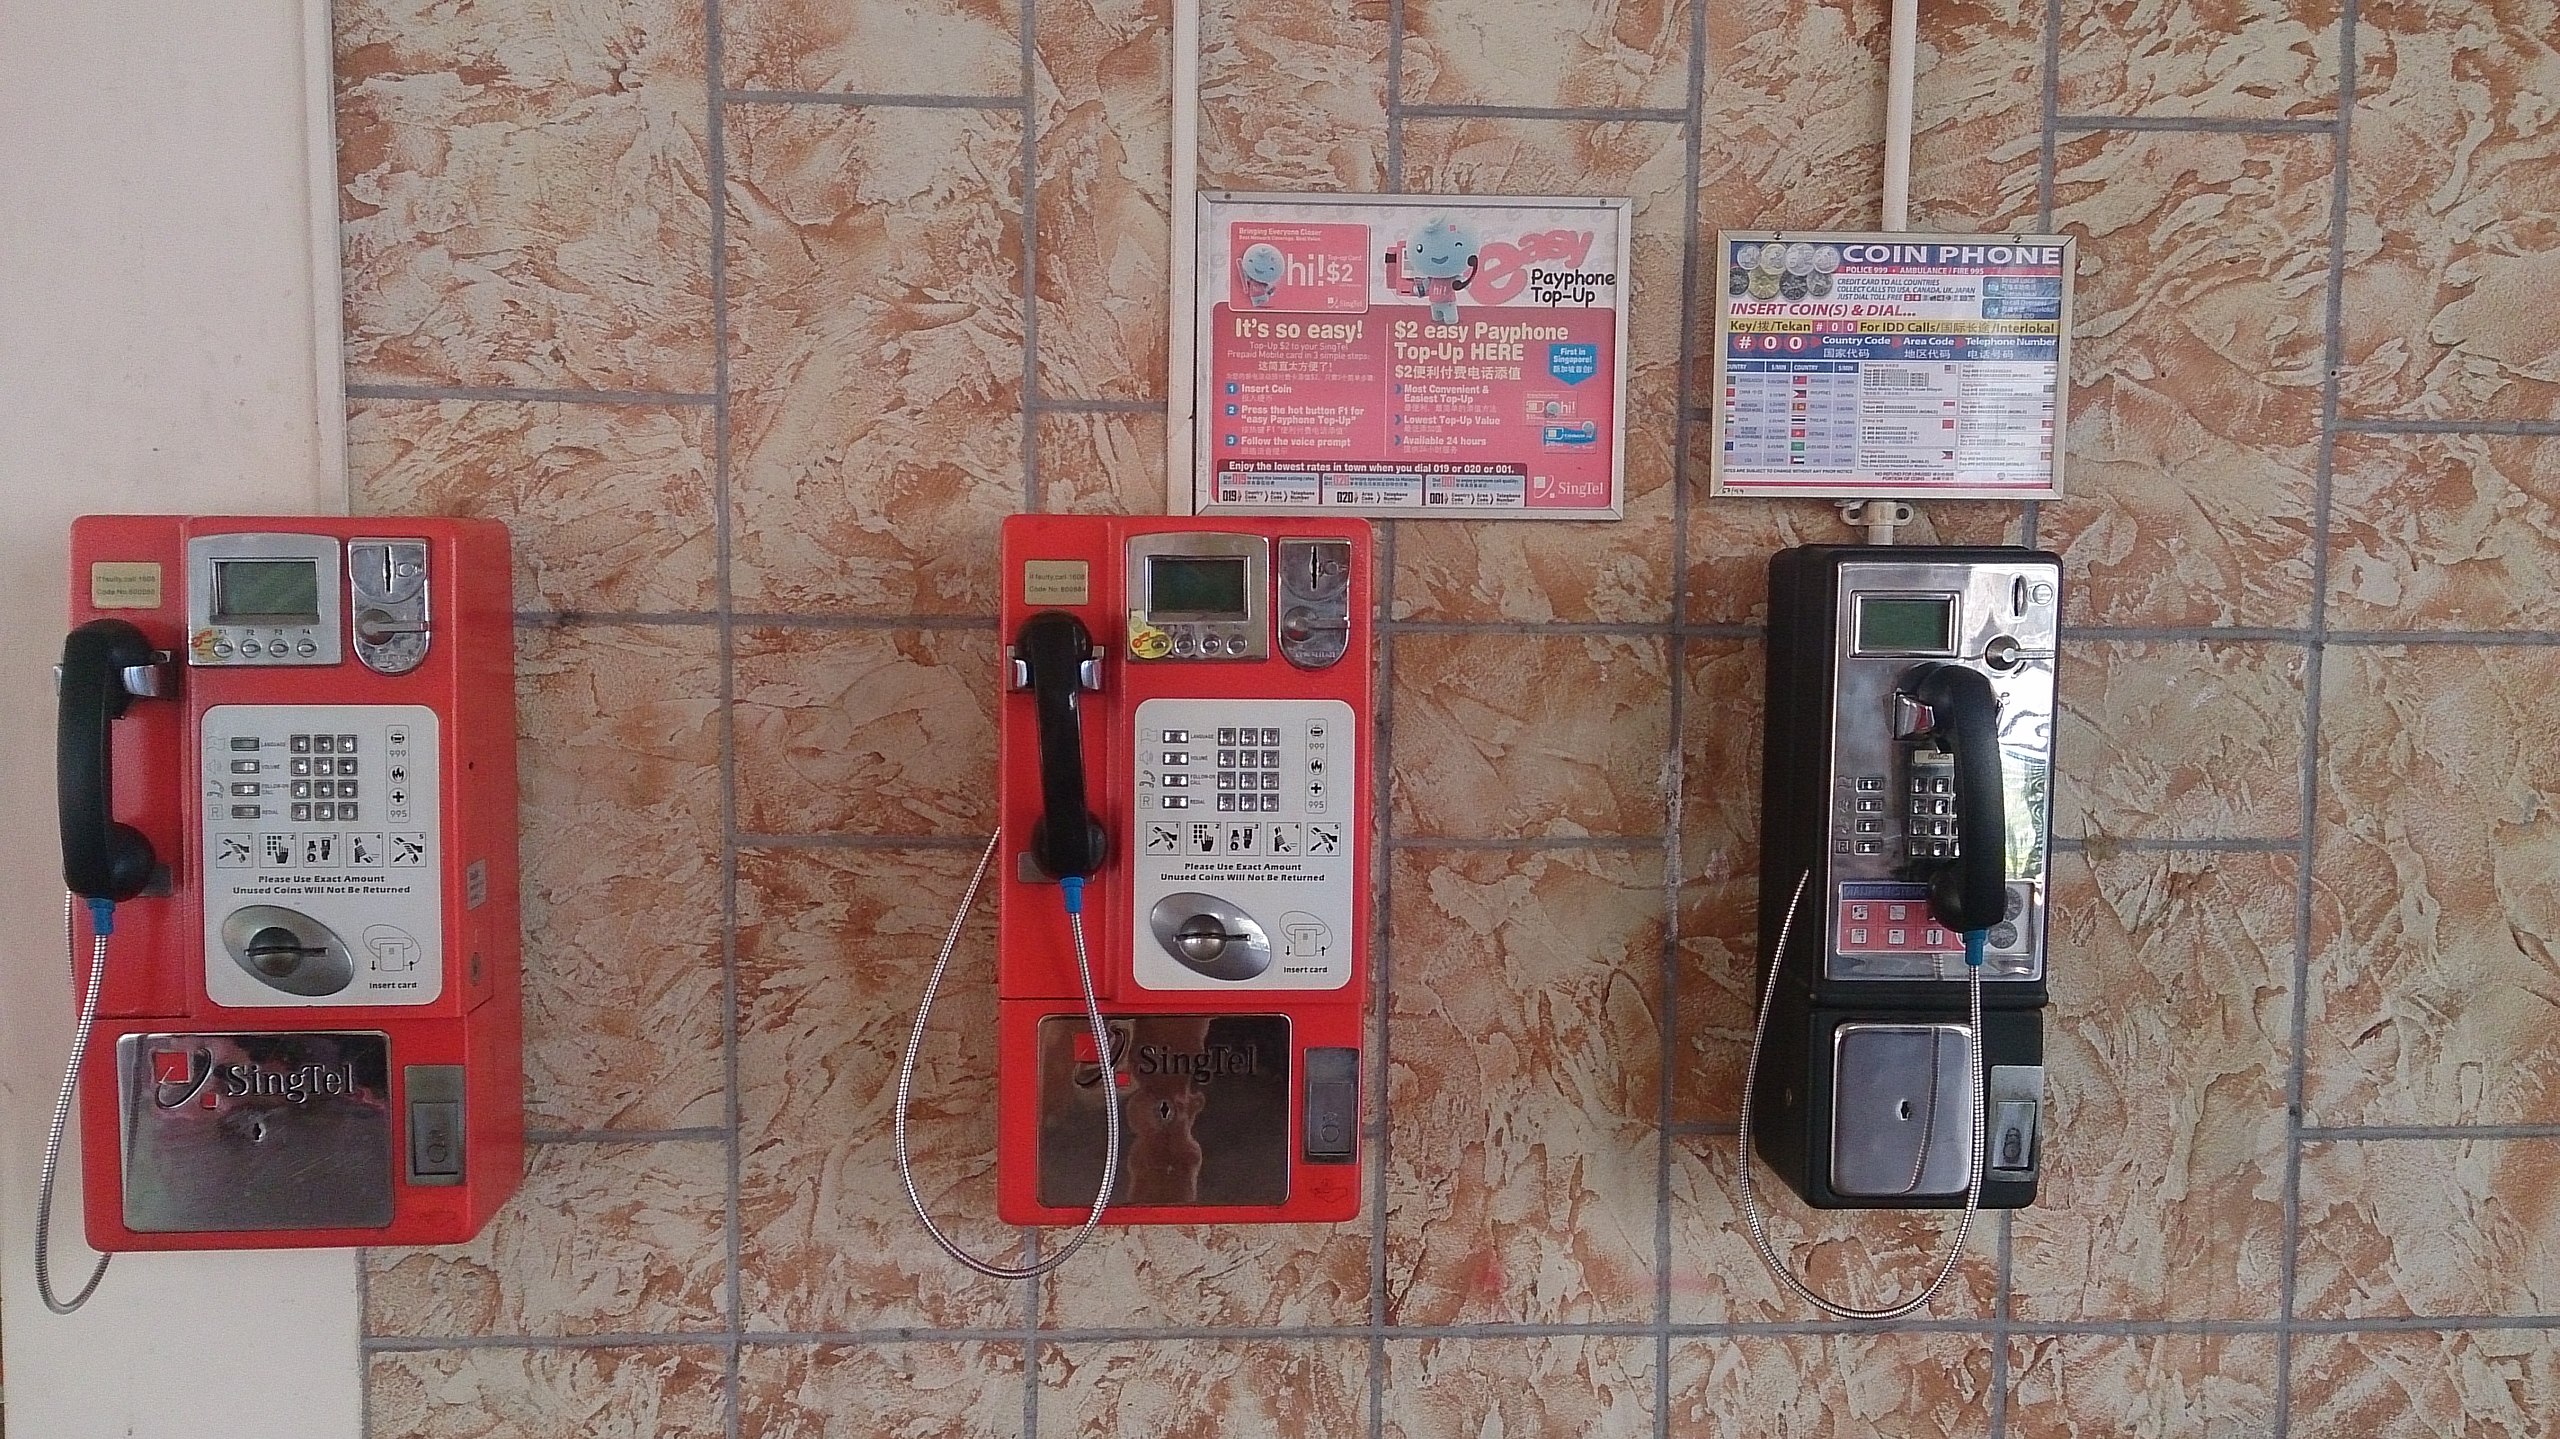 Don’t hang up yet: Public payphone remains a cherished service for some people | The Straits Times